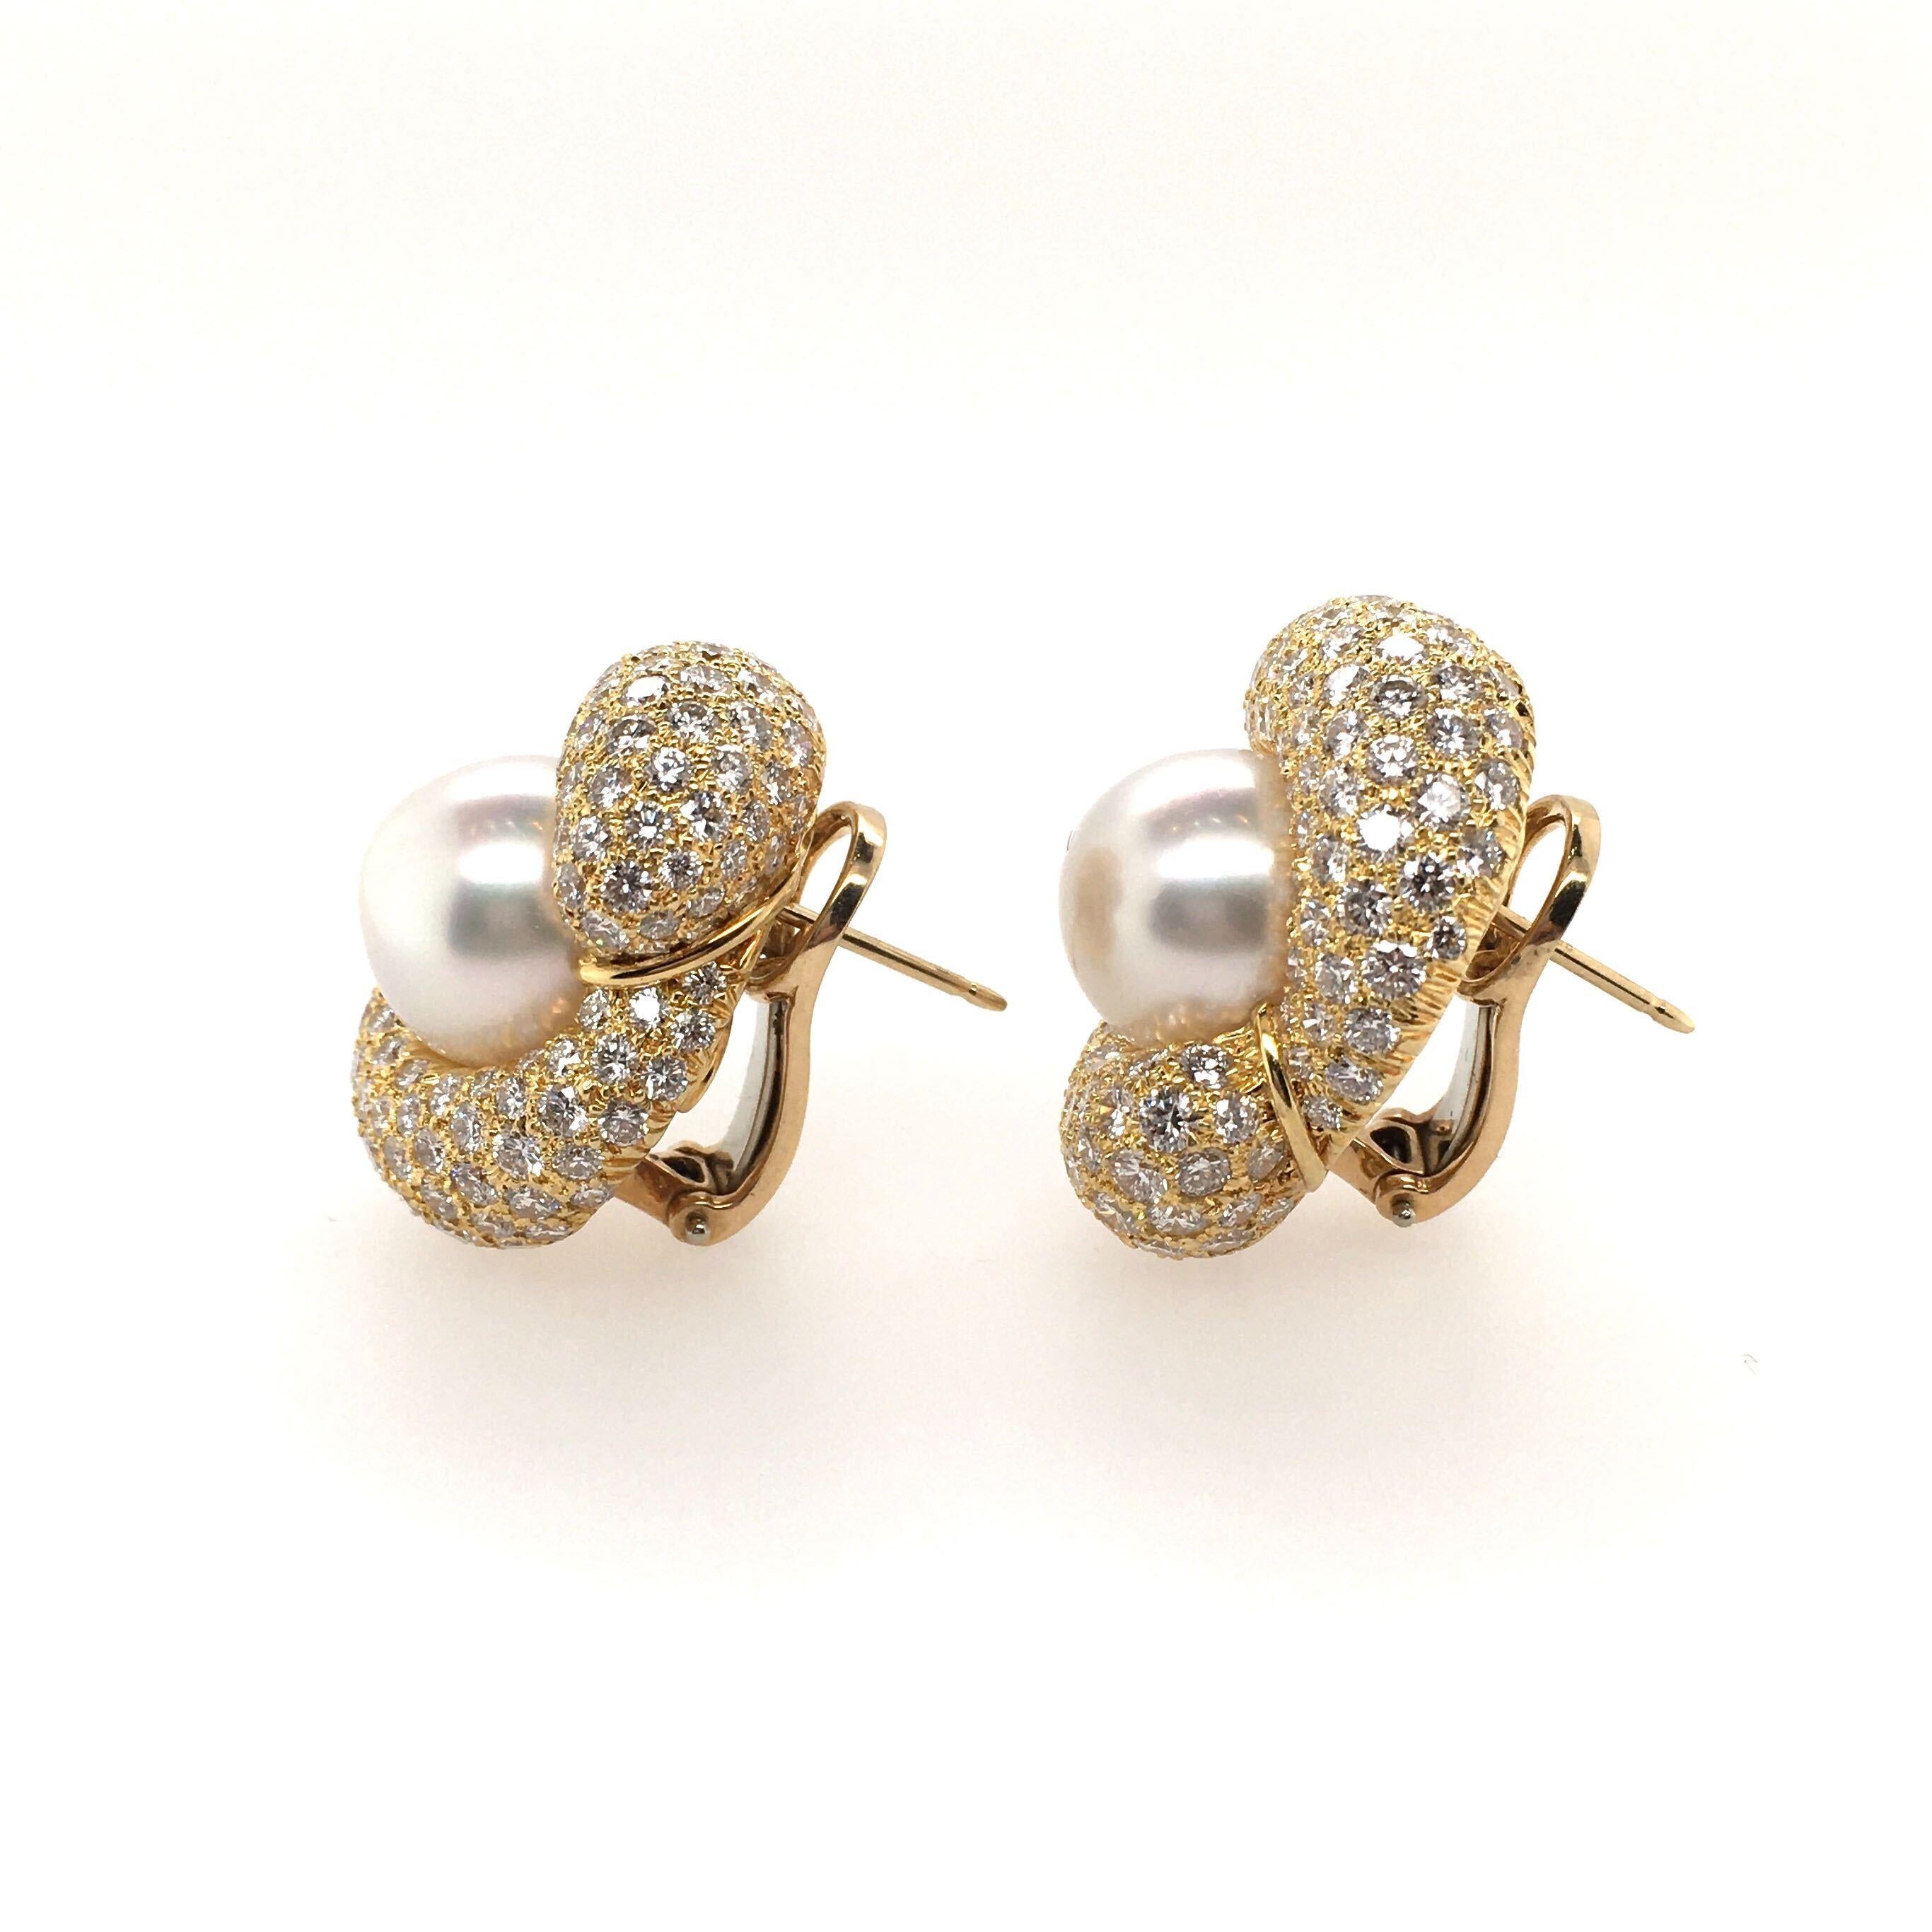 A pair of 18 karat yellow gold, diamond and South Sea pearl earrings.  Henry Dunay.  Designed as a pave set diamond knot, centering a creamy white South Sea pearl measuring 12.7 mm.  Two hundred and forty diamonds weigh approximately 8.00 carats. 